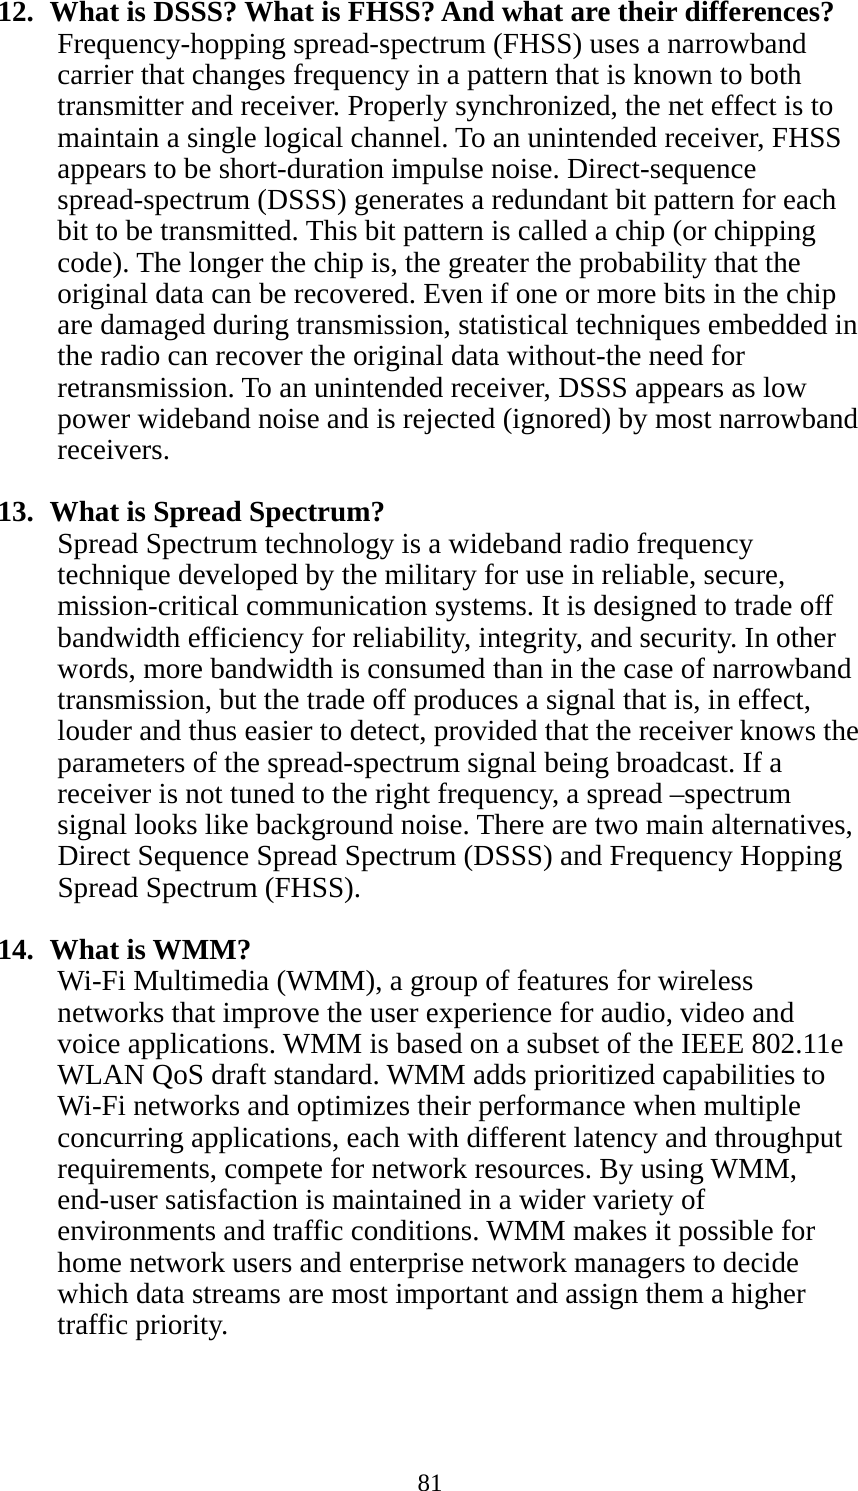  8112.   What is DSSS? What is FHSS? And what are their differences? Frequency-hopping spread-spectrum (FHSS) uses a narrowband carrier that changes frequency in a pattern that is known to both transmitter and receiver. Properly synchronized, the net effect is to maintain a single logical channel. To an unintended receiver, FHSS appears to be short-duration impulse noise. Direct-sequence spread-spectrum (DSSS) generates a redundant bit pattern for each bit to be transmitted. This bit pattern is called a chip (or chipping code). The longer the chip is, the greater the probability that the original data can be recovered. Even if one or more bits in the chip are damaged during transmission, statistical techniques embedded in the radio can recover the original data without-the need for retransmission. To an unintended receiver, DSSS appears as low power wideband noise and is rejected (ignored) by most narrowband receivers.  13.   What is Spread Spectrum? Spread Spectrum technology is a wideband radio frequency technique developed by the military for use in reliable, secure, mission-critical communication systems. It is designed to trade off bandwidth efficiency for reliability, integrity, and security. In other words, more bandwidth is consumed than in the case of narrowband transmission, but the trade off produces a signal that is, in effect, louder and thus easier to detect, provided that the receiver knows the parameters of the spread-spectrum signal being broadcast. If a receiver is not tuned to the right frequency, a spread –spectrum signal looks like background noise. There are two main alternatives, Direct Sequence Spread Spectrum (DSSS) and Frequency Hopping Spread Spectrum (FHSS).  14.  What is WMM? Wi-Fi Multimedia (WMM), a group of features for wireless networks that improve the user experience for audio, video and voice applications. WMM is based on a subset of the IEEE 802.11e WLAN QoS draft standard. WMM adds prioritized capabilities to Wi-Fi networks and optimizes their performance when multiple concurring applications, each with different latency and throughput requirements, compete for network resources. By using WMM, end-user satisfaction is maintained in a wider variety of environments and traffic conditions. WMM makes it possible for home network users and enterprise network managers to decide which data streams are most important and assign them a higher traffic priority.    